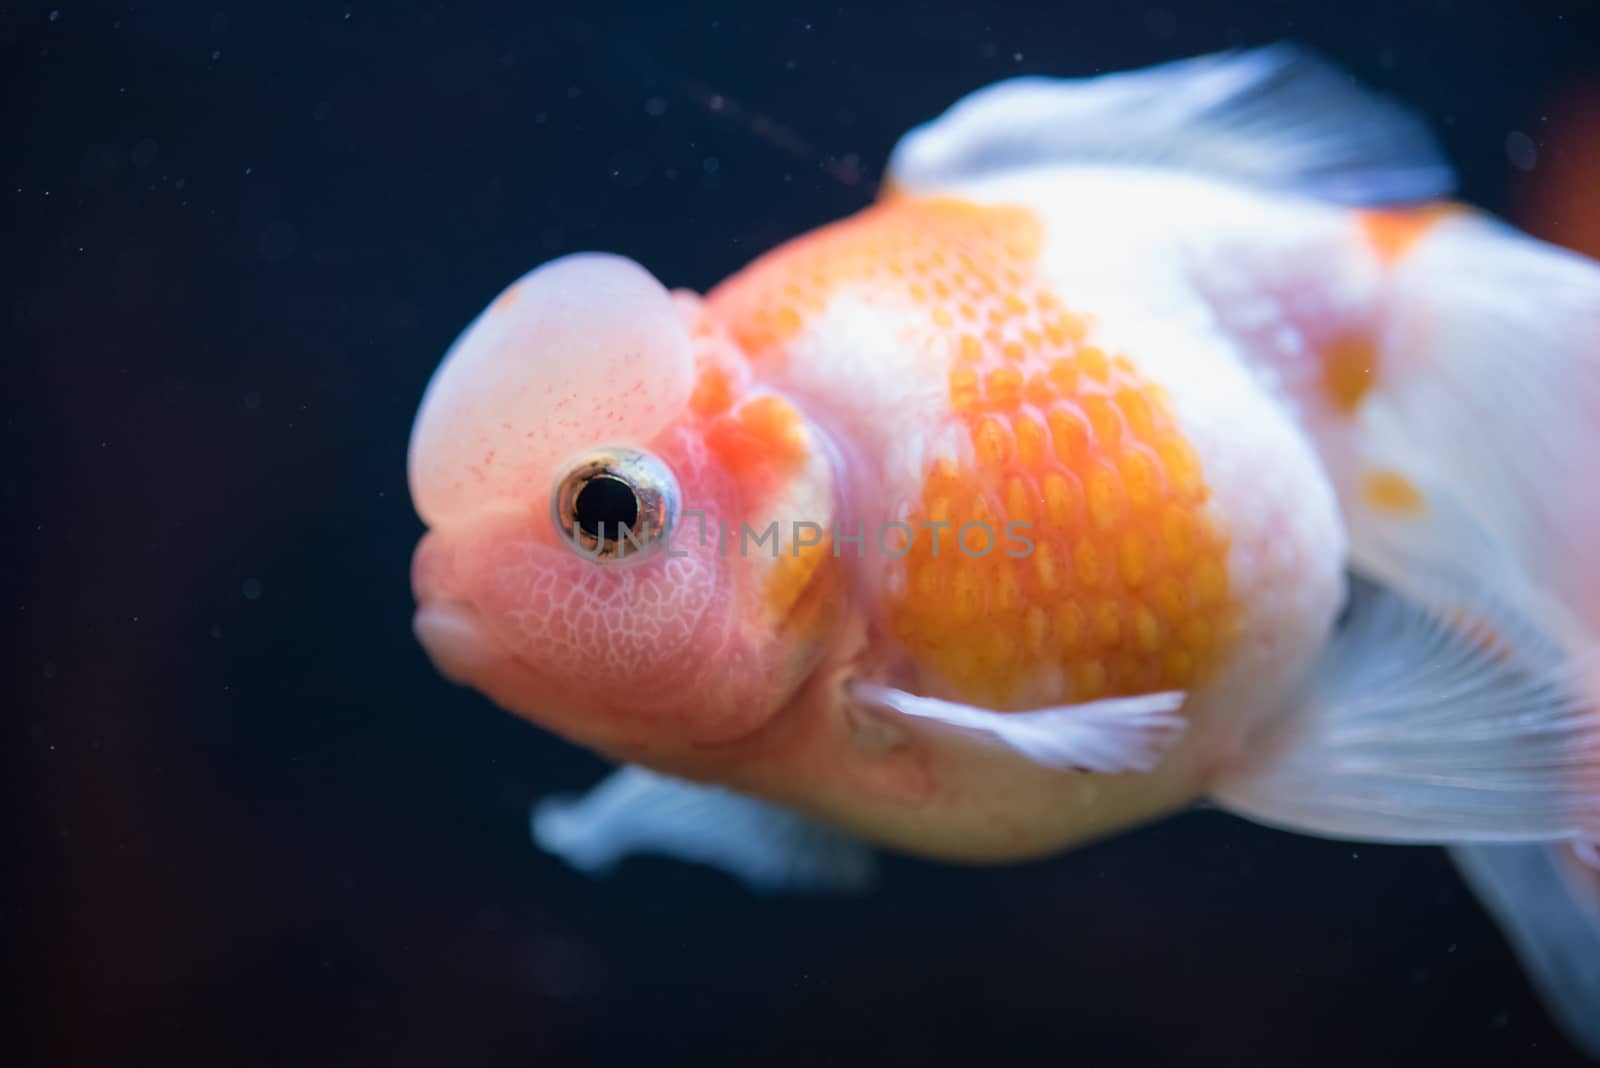 Red and White Crown Pearlscale Goldfish - with lime collecting on the surface of their scales, they are dressed to impress with shiny, twinkling pearls.